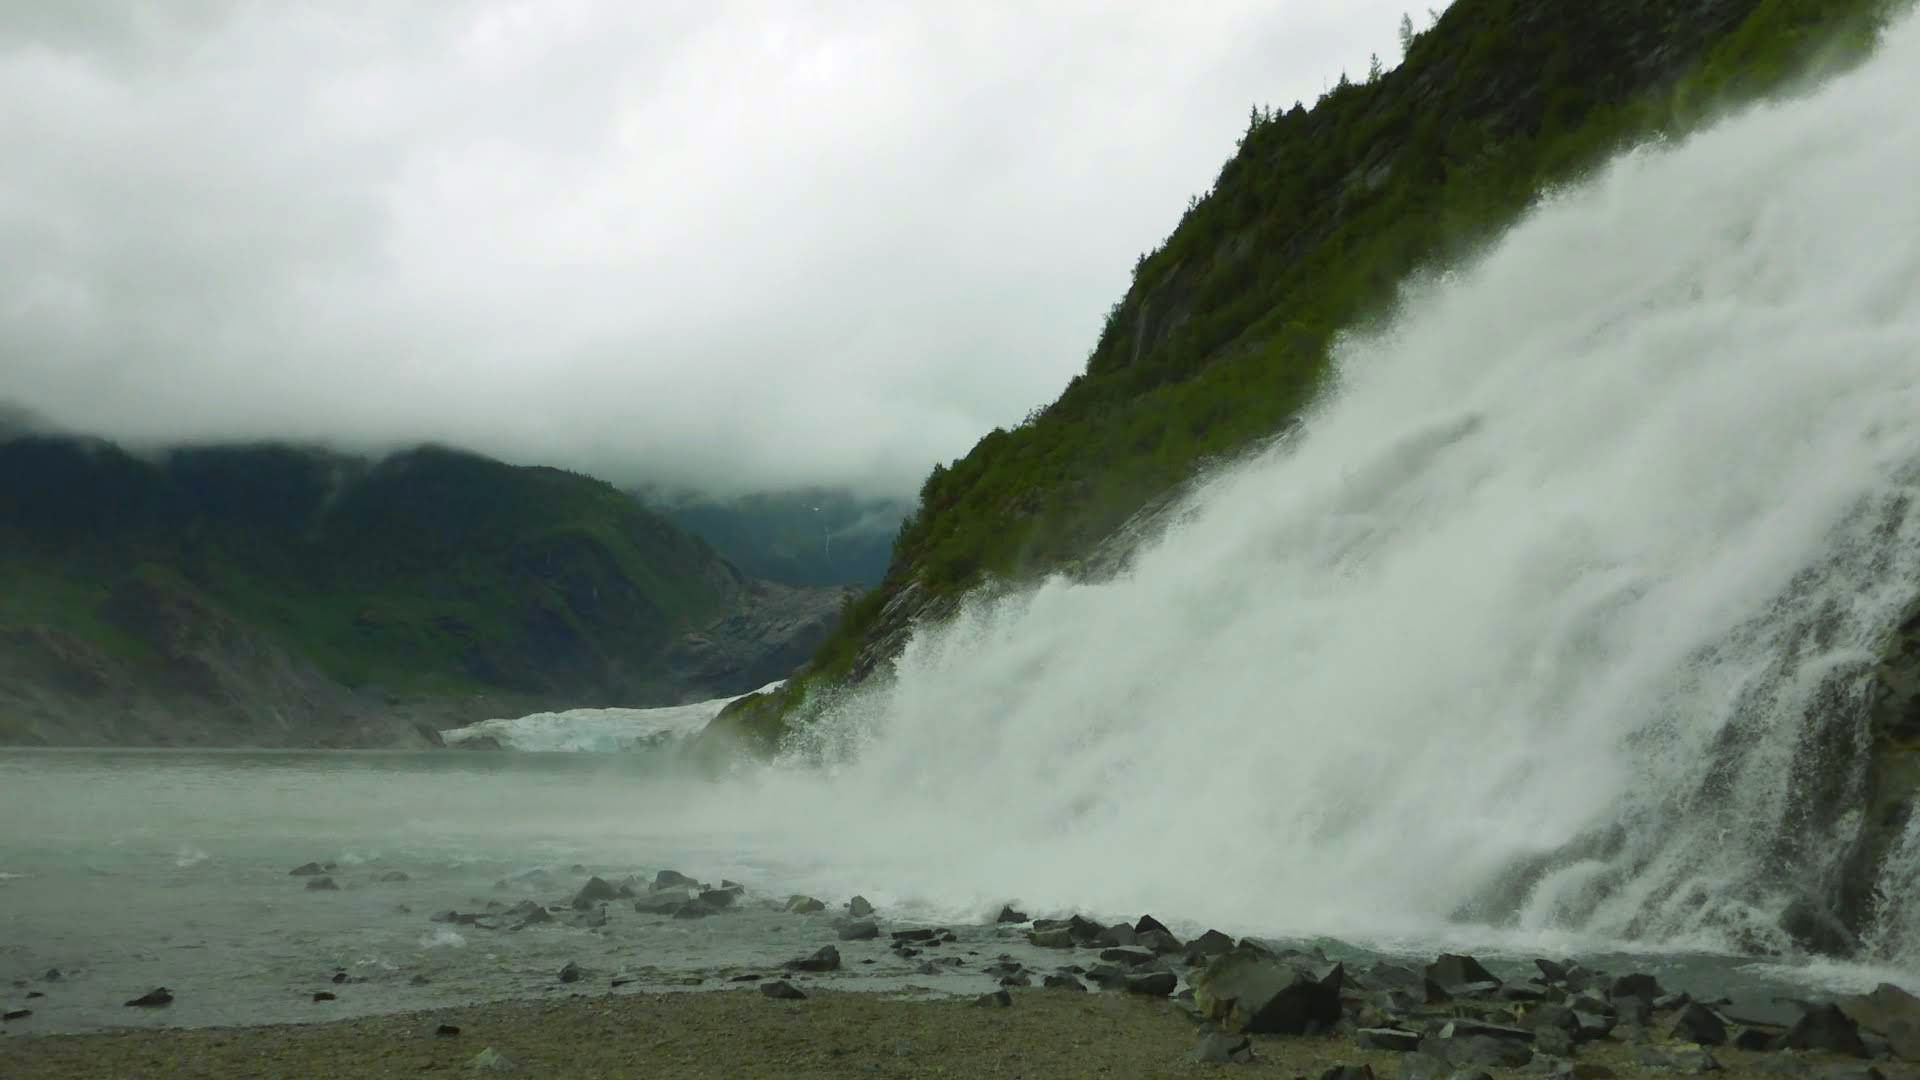 A waterfall tumbles from above against rocks into a glacier fed lake. There is a glacier in the background. It is a dark, overcast and rainy day on an Alaska itinerary